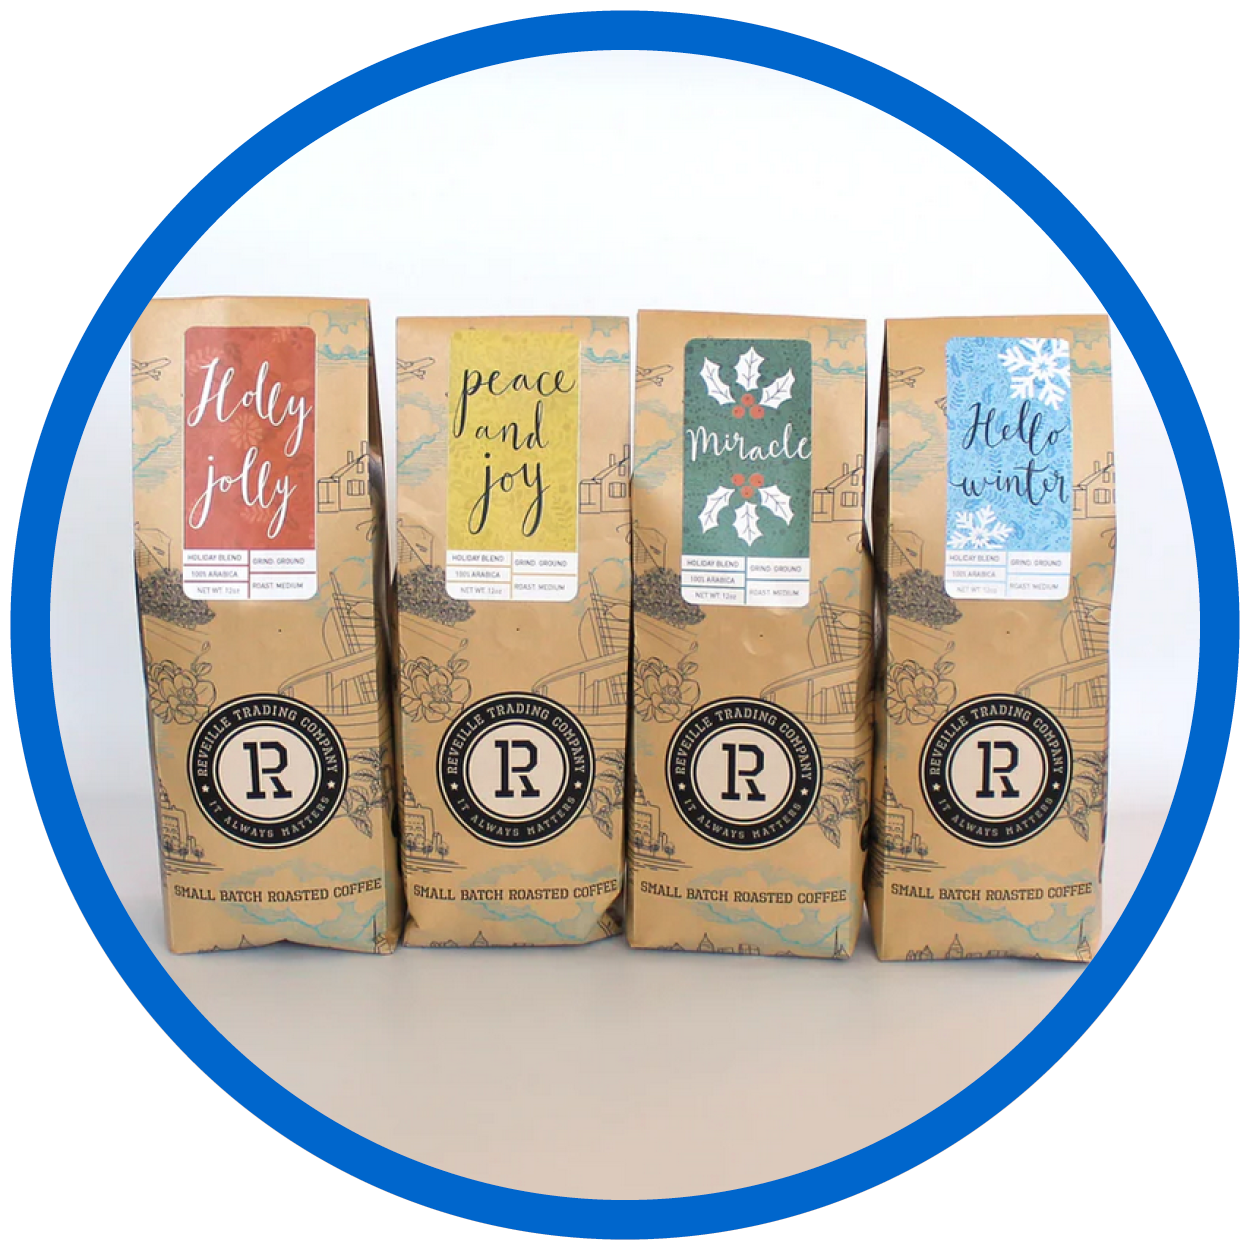 Reveille Trading Company Holiday Blend Bundle of 4 coffee varieties.